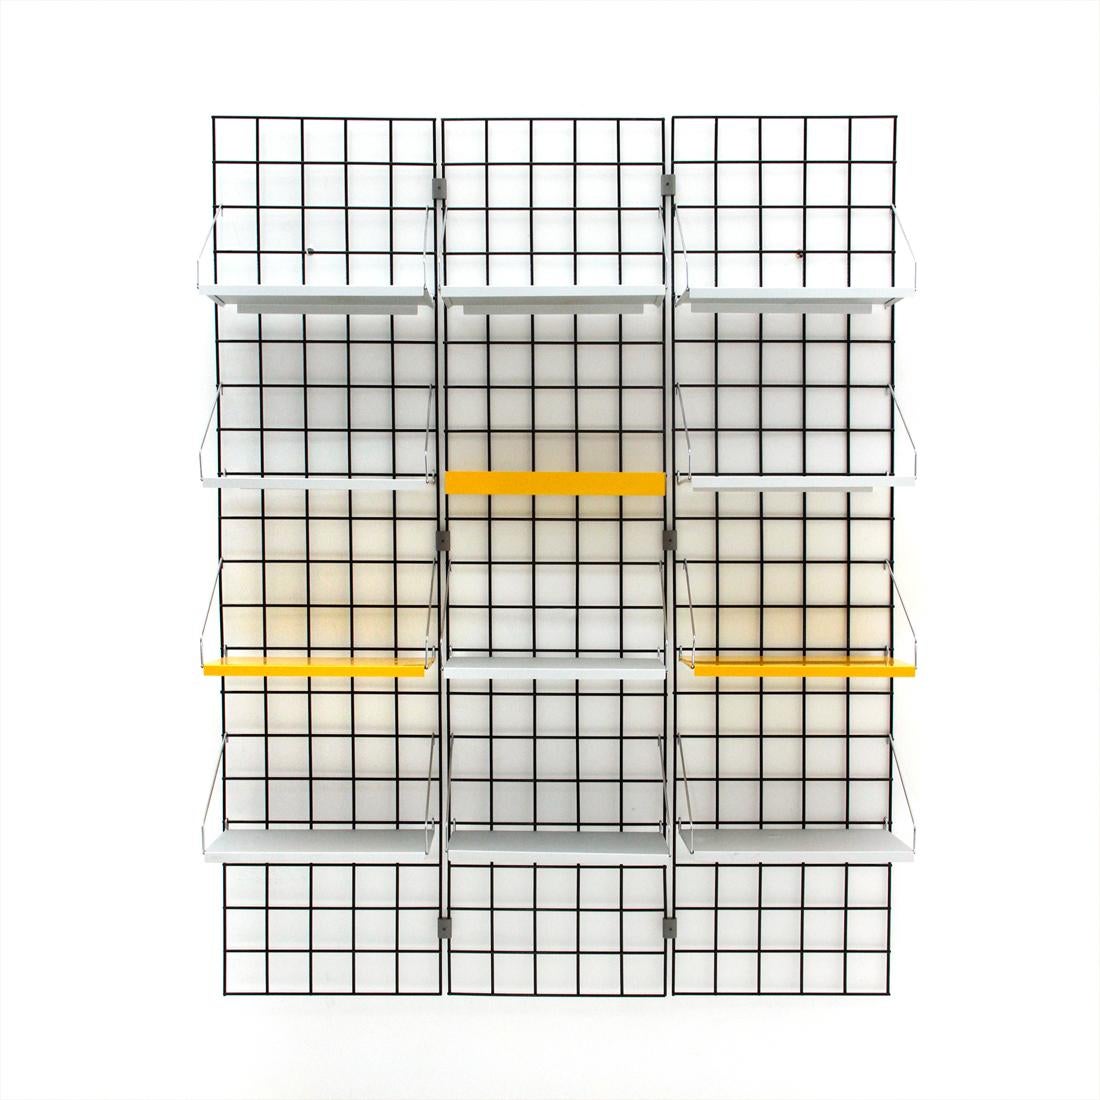 Library also used as a separè produced by Robots on a project by Piero Polato in the '70s.
Black metal mesh structure.
Yellow and white colored metal shelves positioned at will.
Excellent general conditions, stock funds never used.

Dimensions: